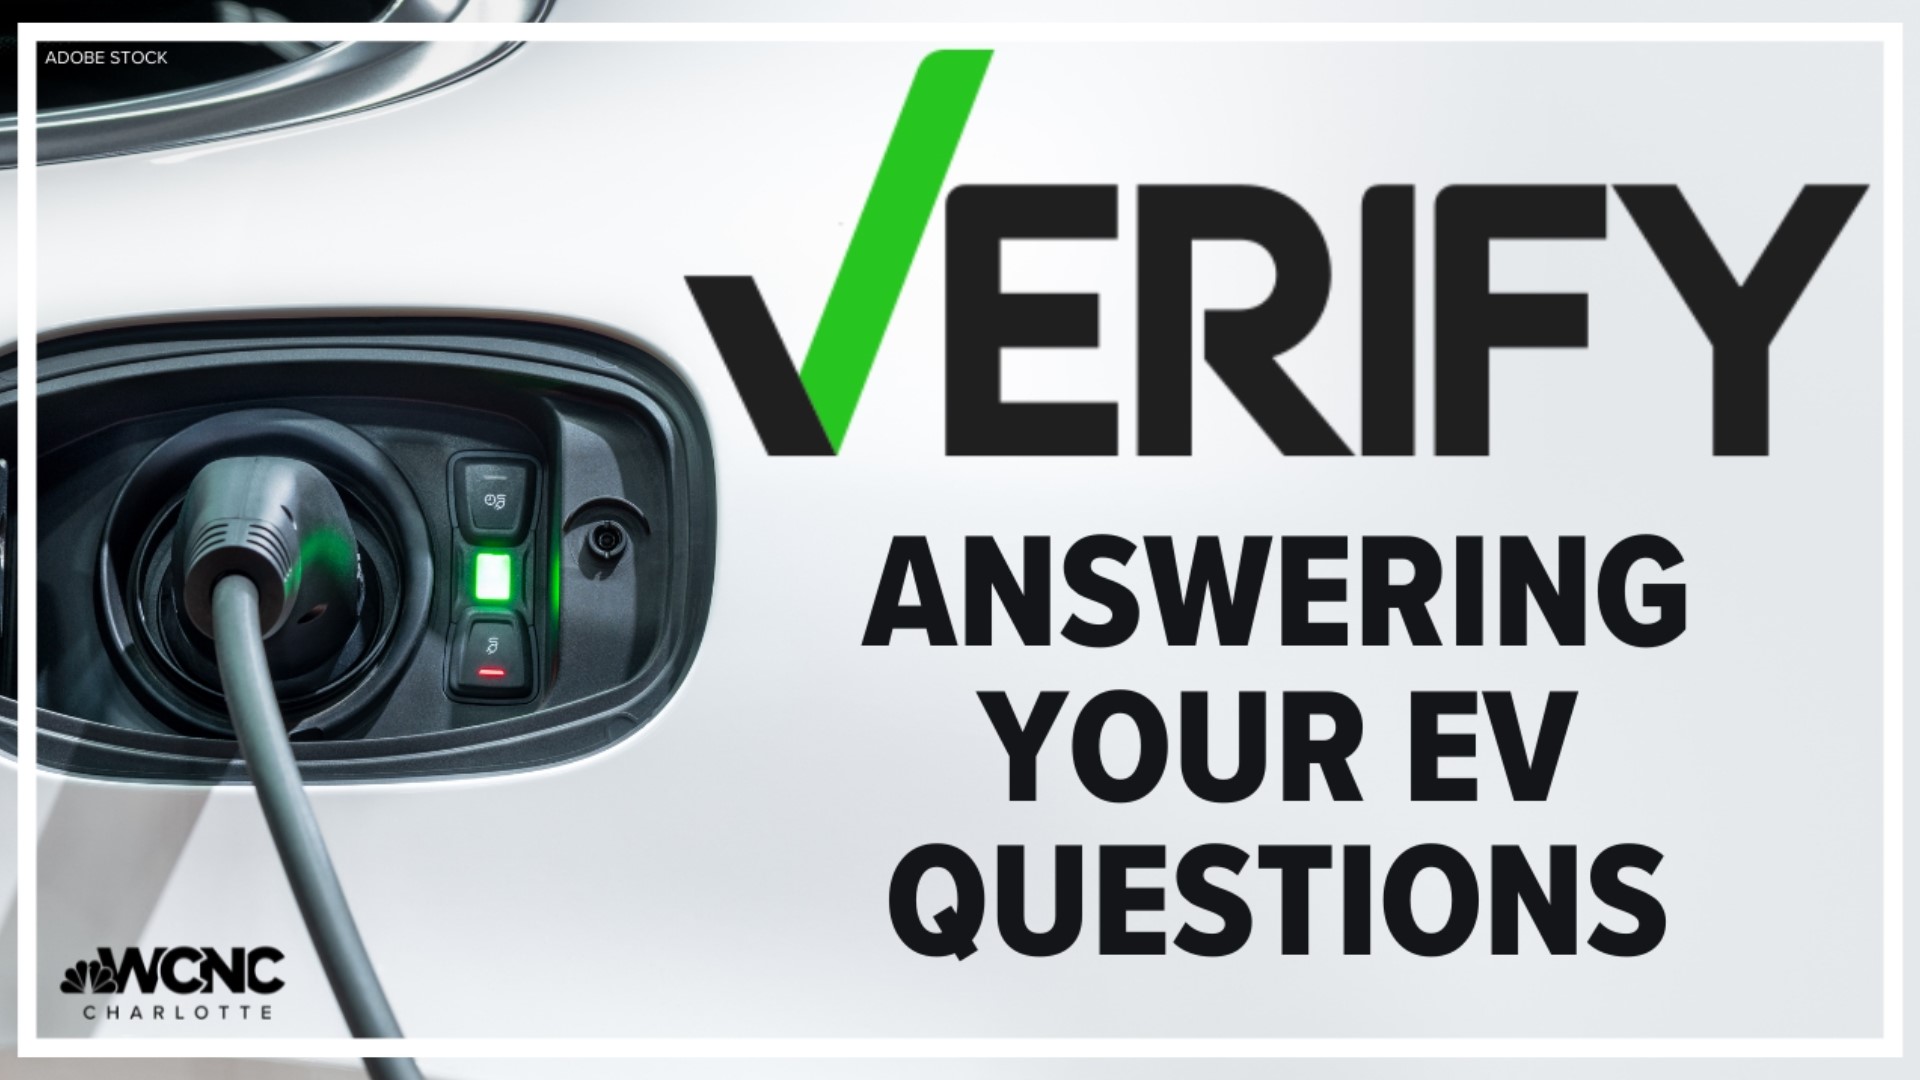 One viewer reached out to our Verify team to ask if an electric vehicle battery fire burns hotter than one in a gas-powered car.